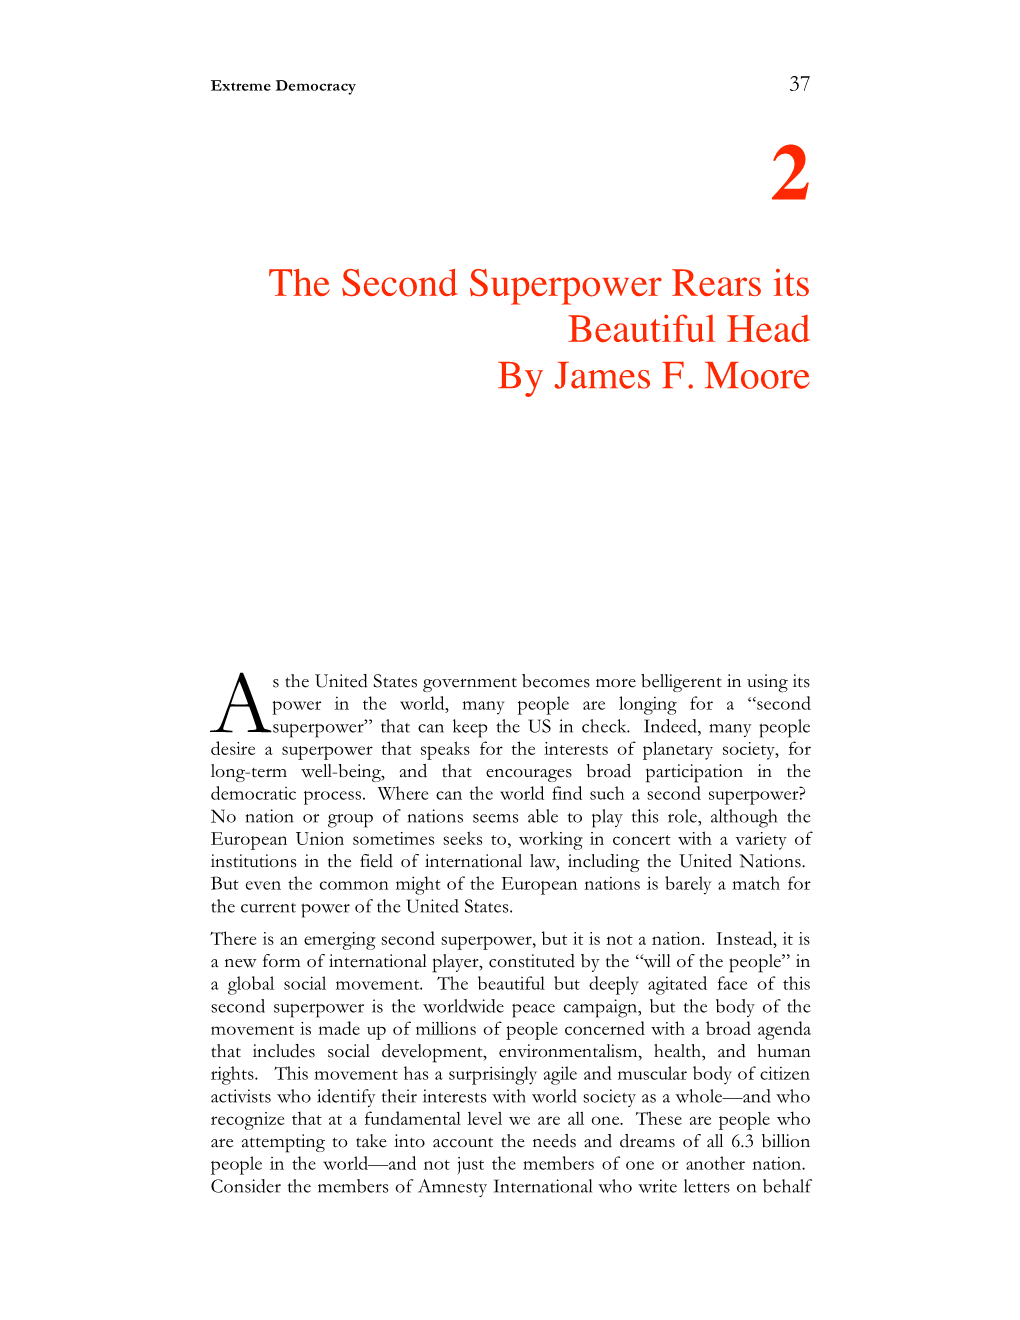 The Second Superpower Rears Its Beautiful Head by James F. Moore